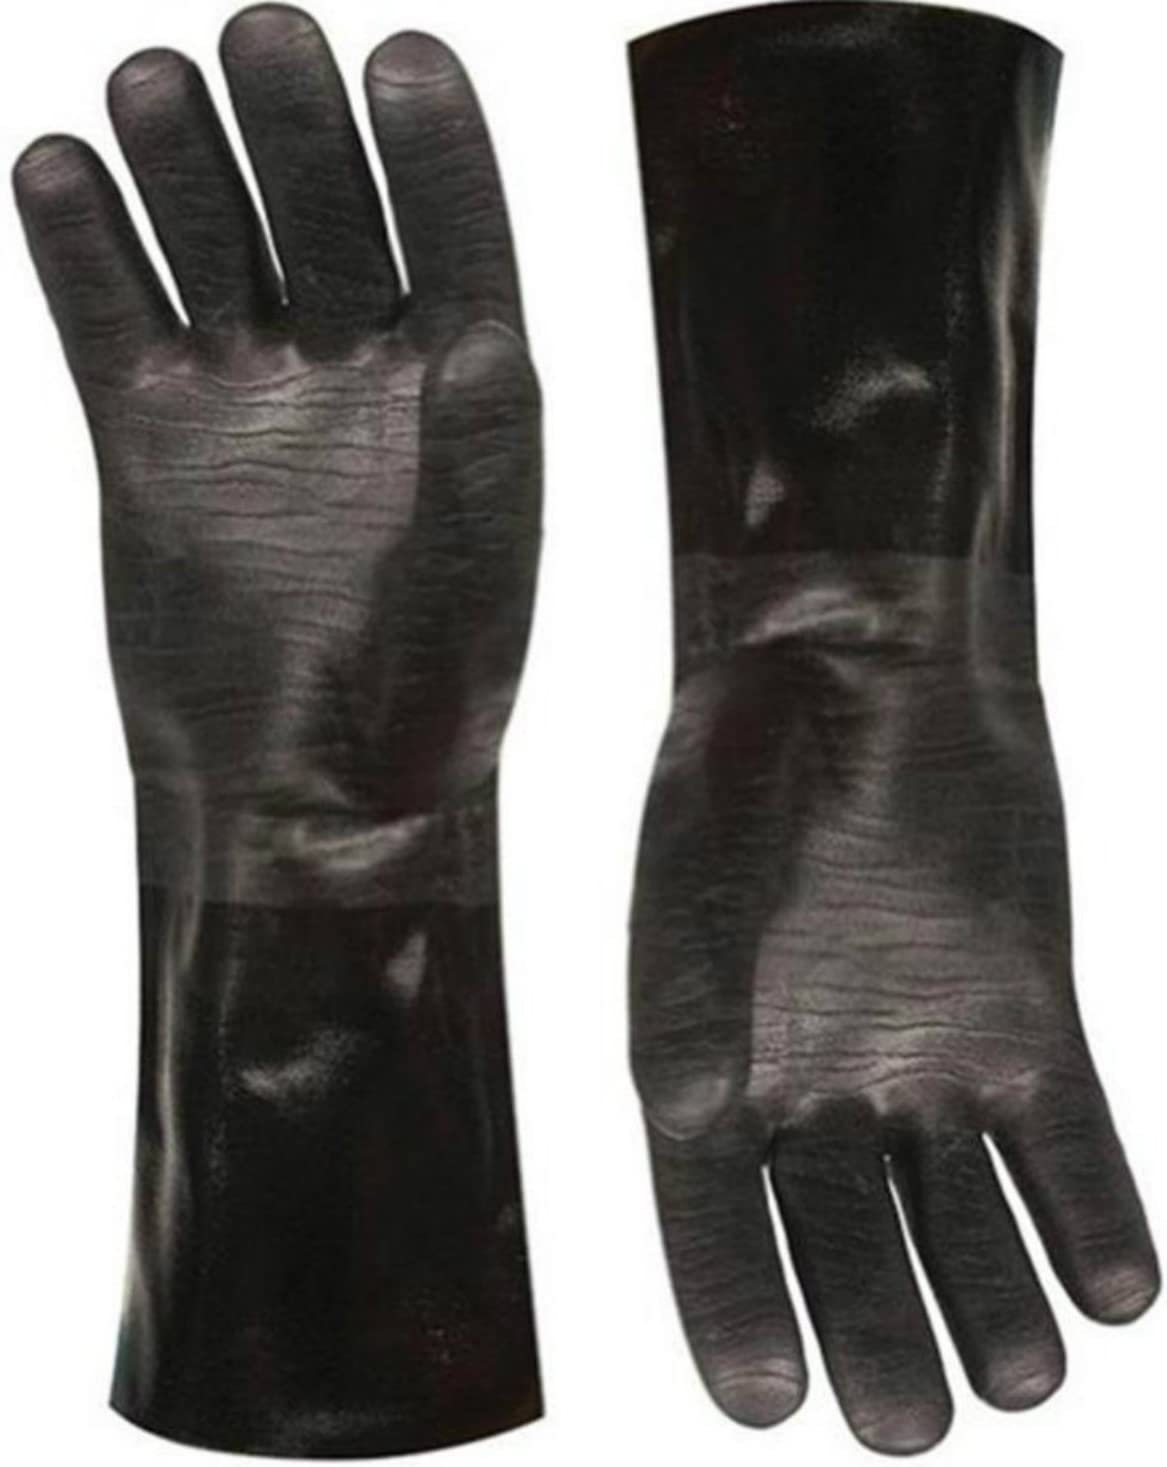 Artisan Griller Insulated Protective BBQ Smoker Grill Oven Gloves